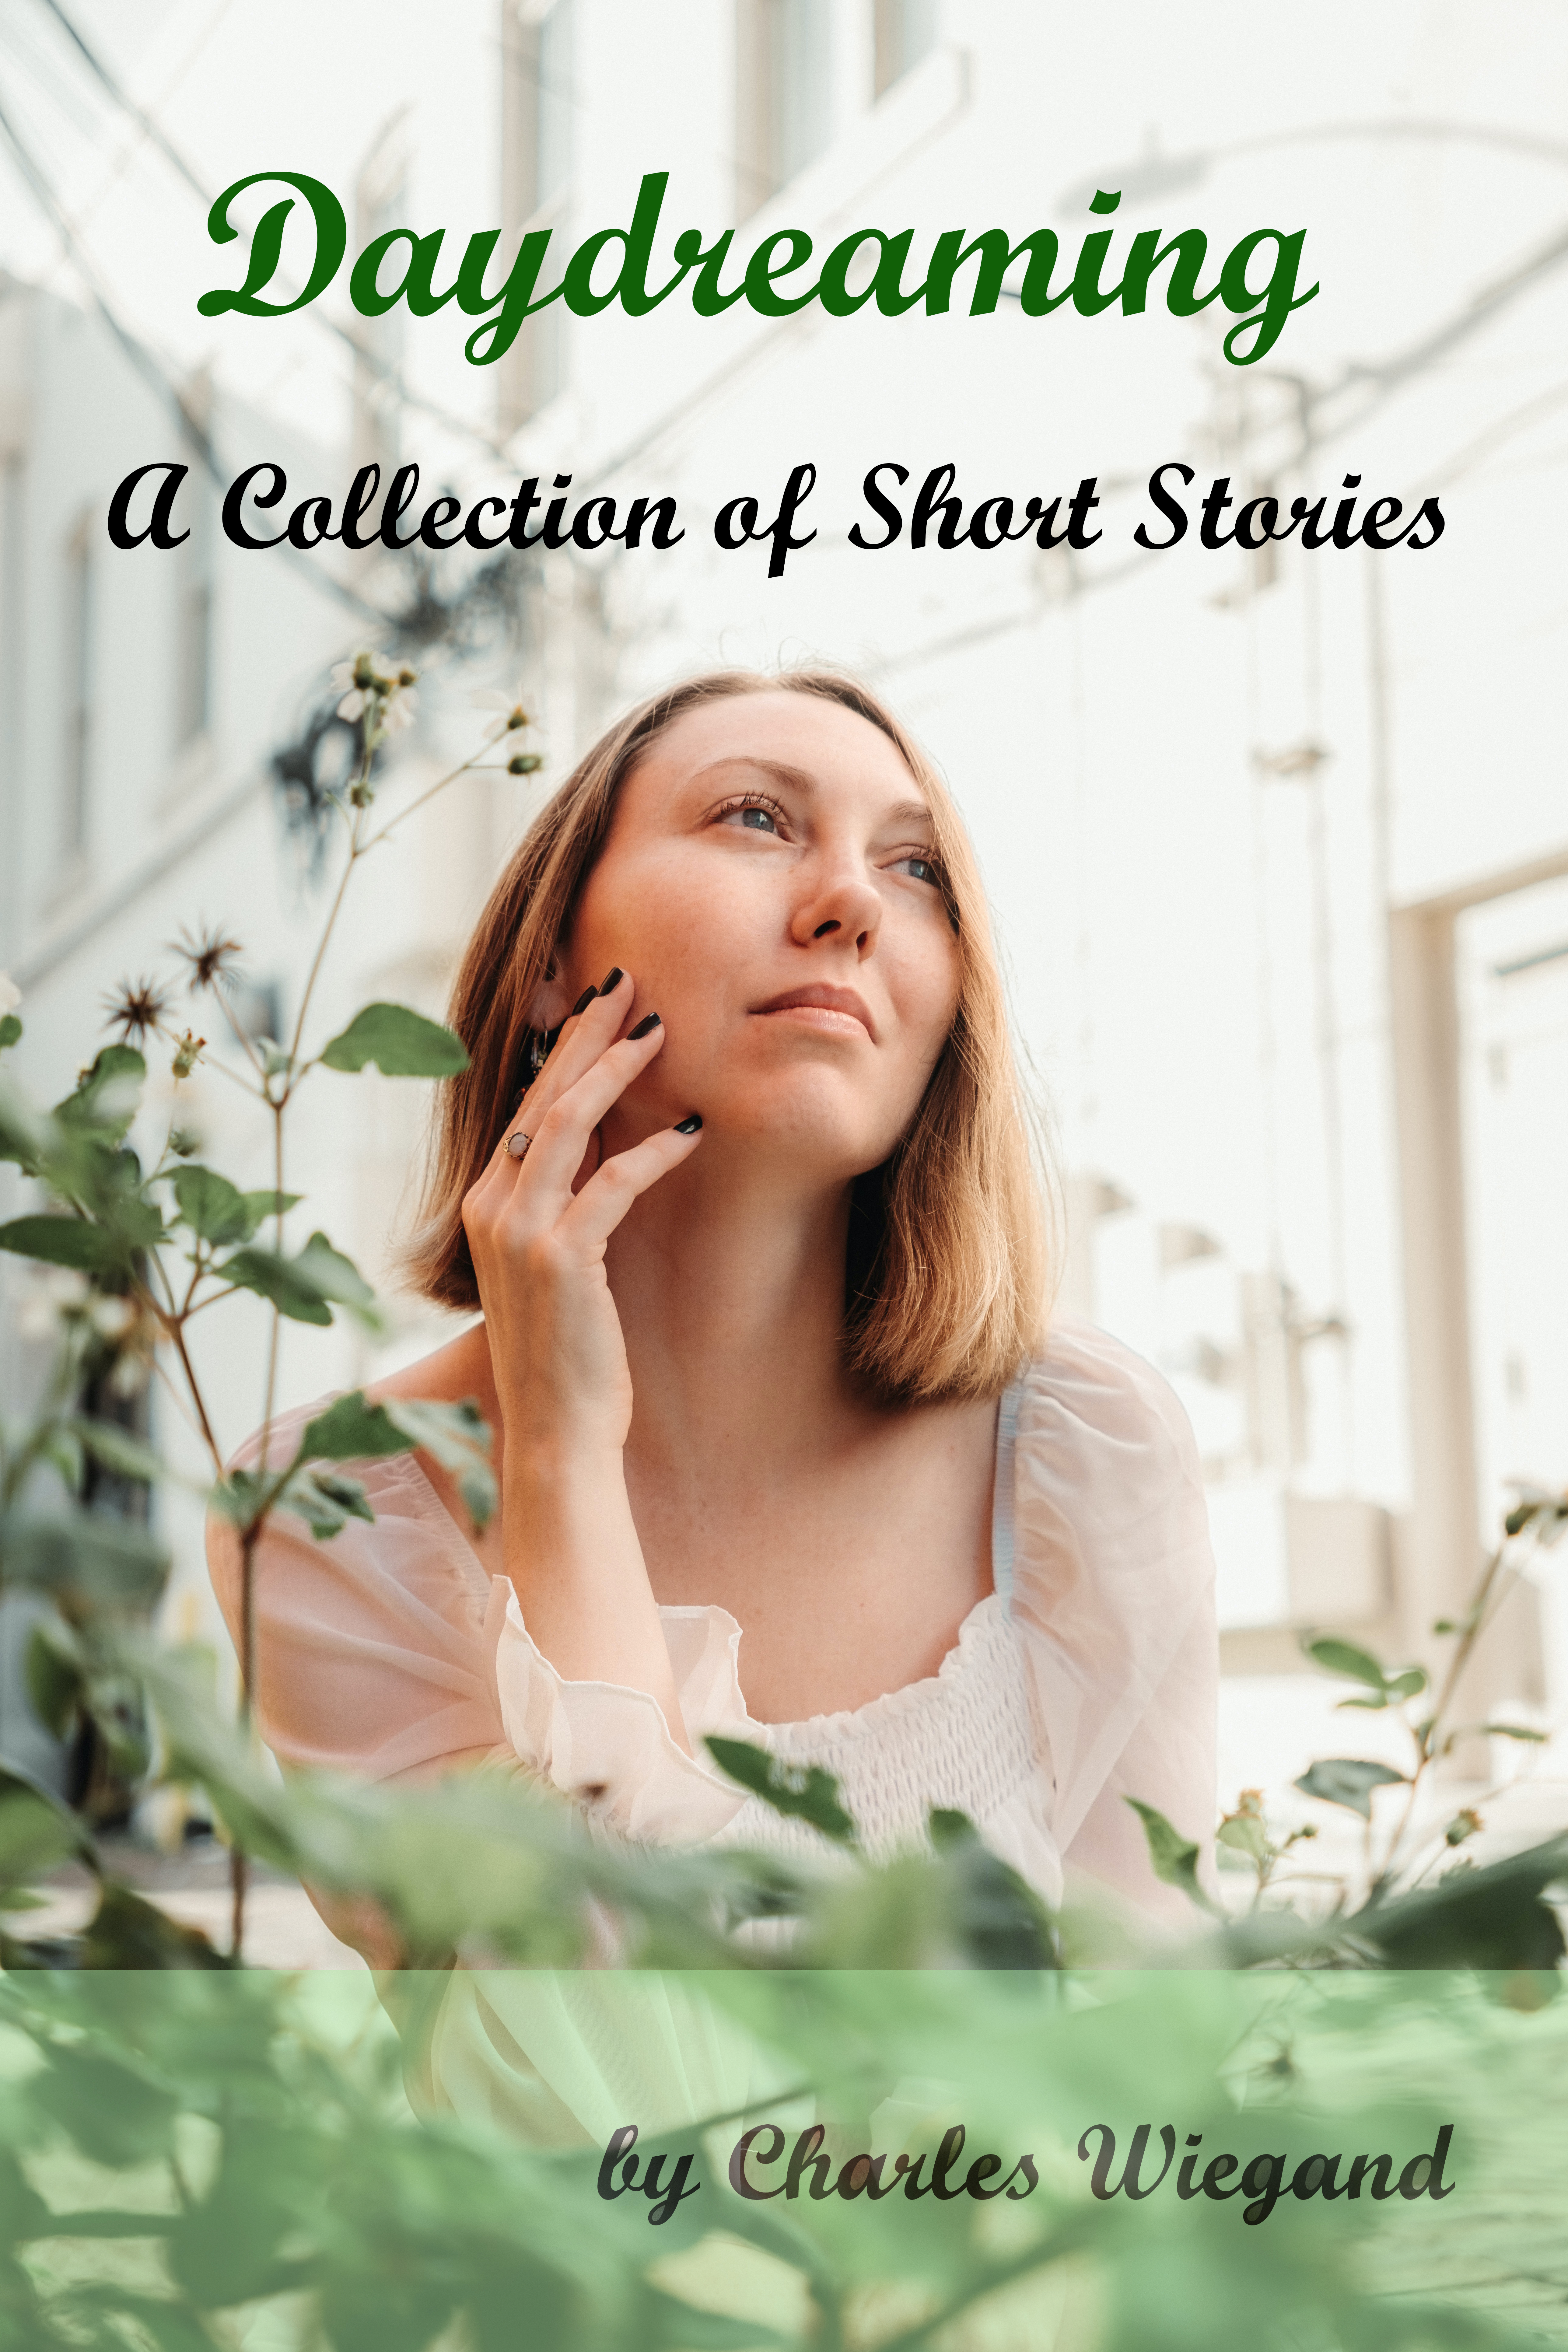 Image of the cover of the book of short stories titled 